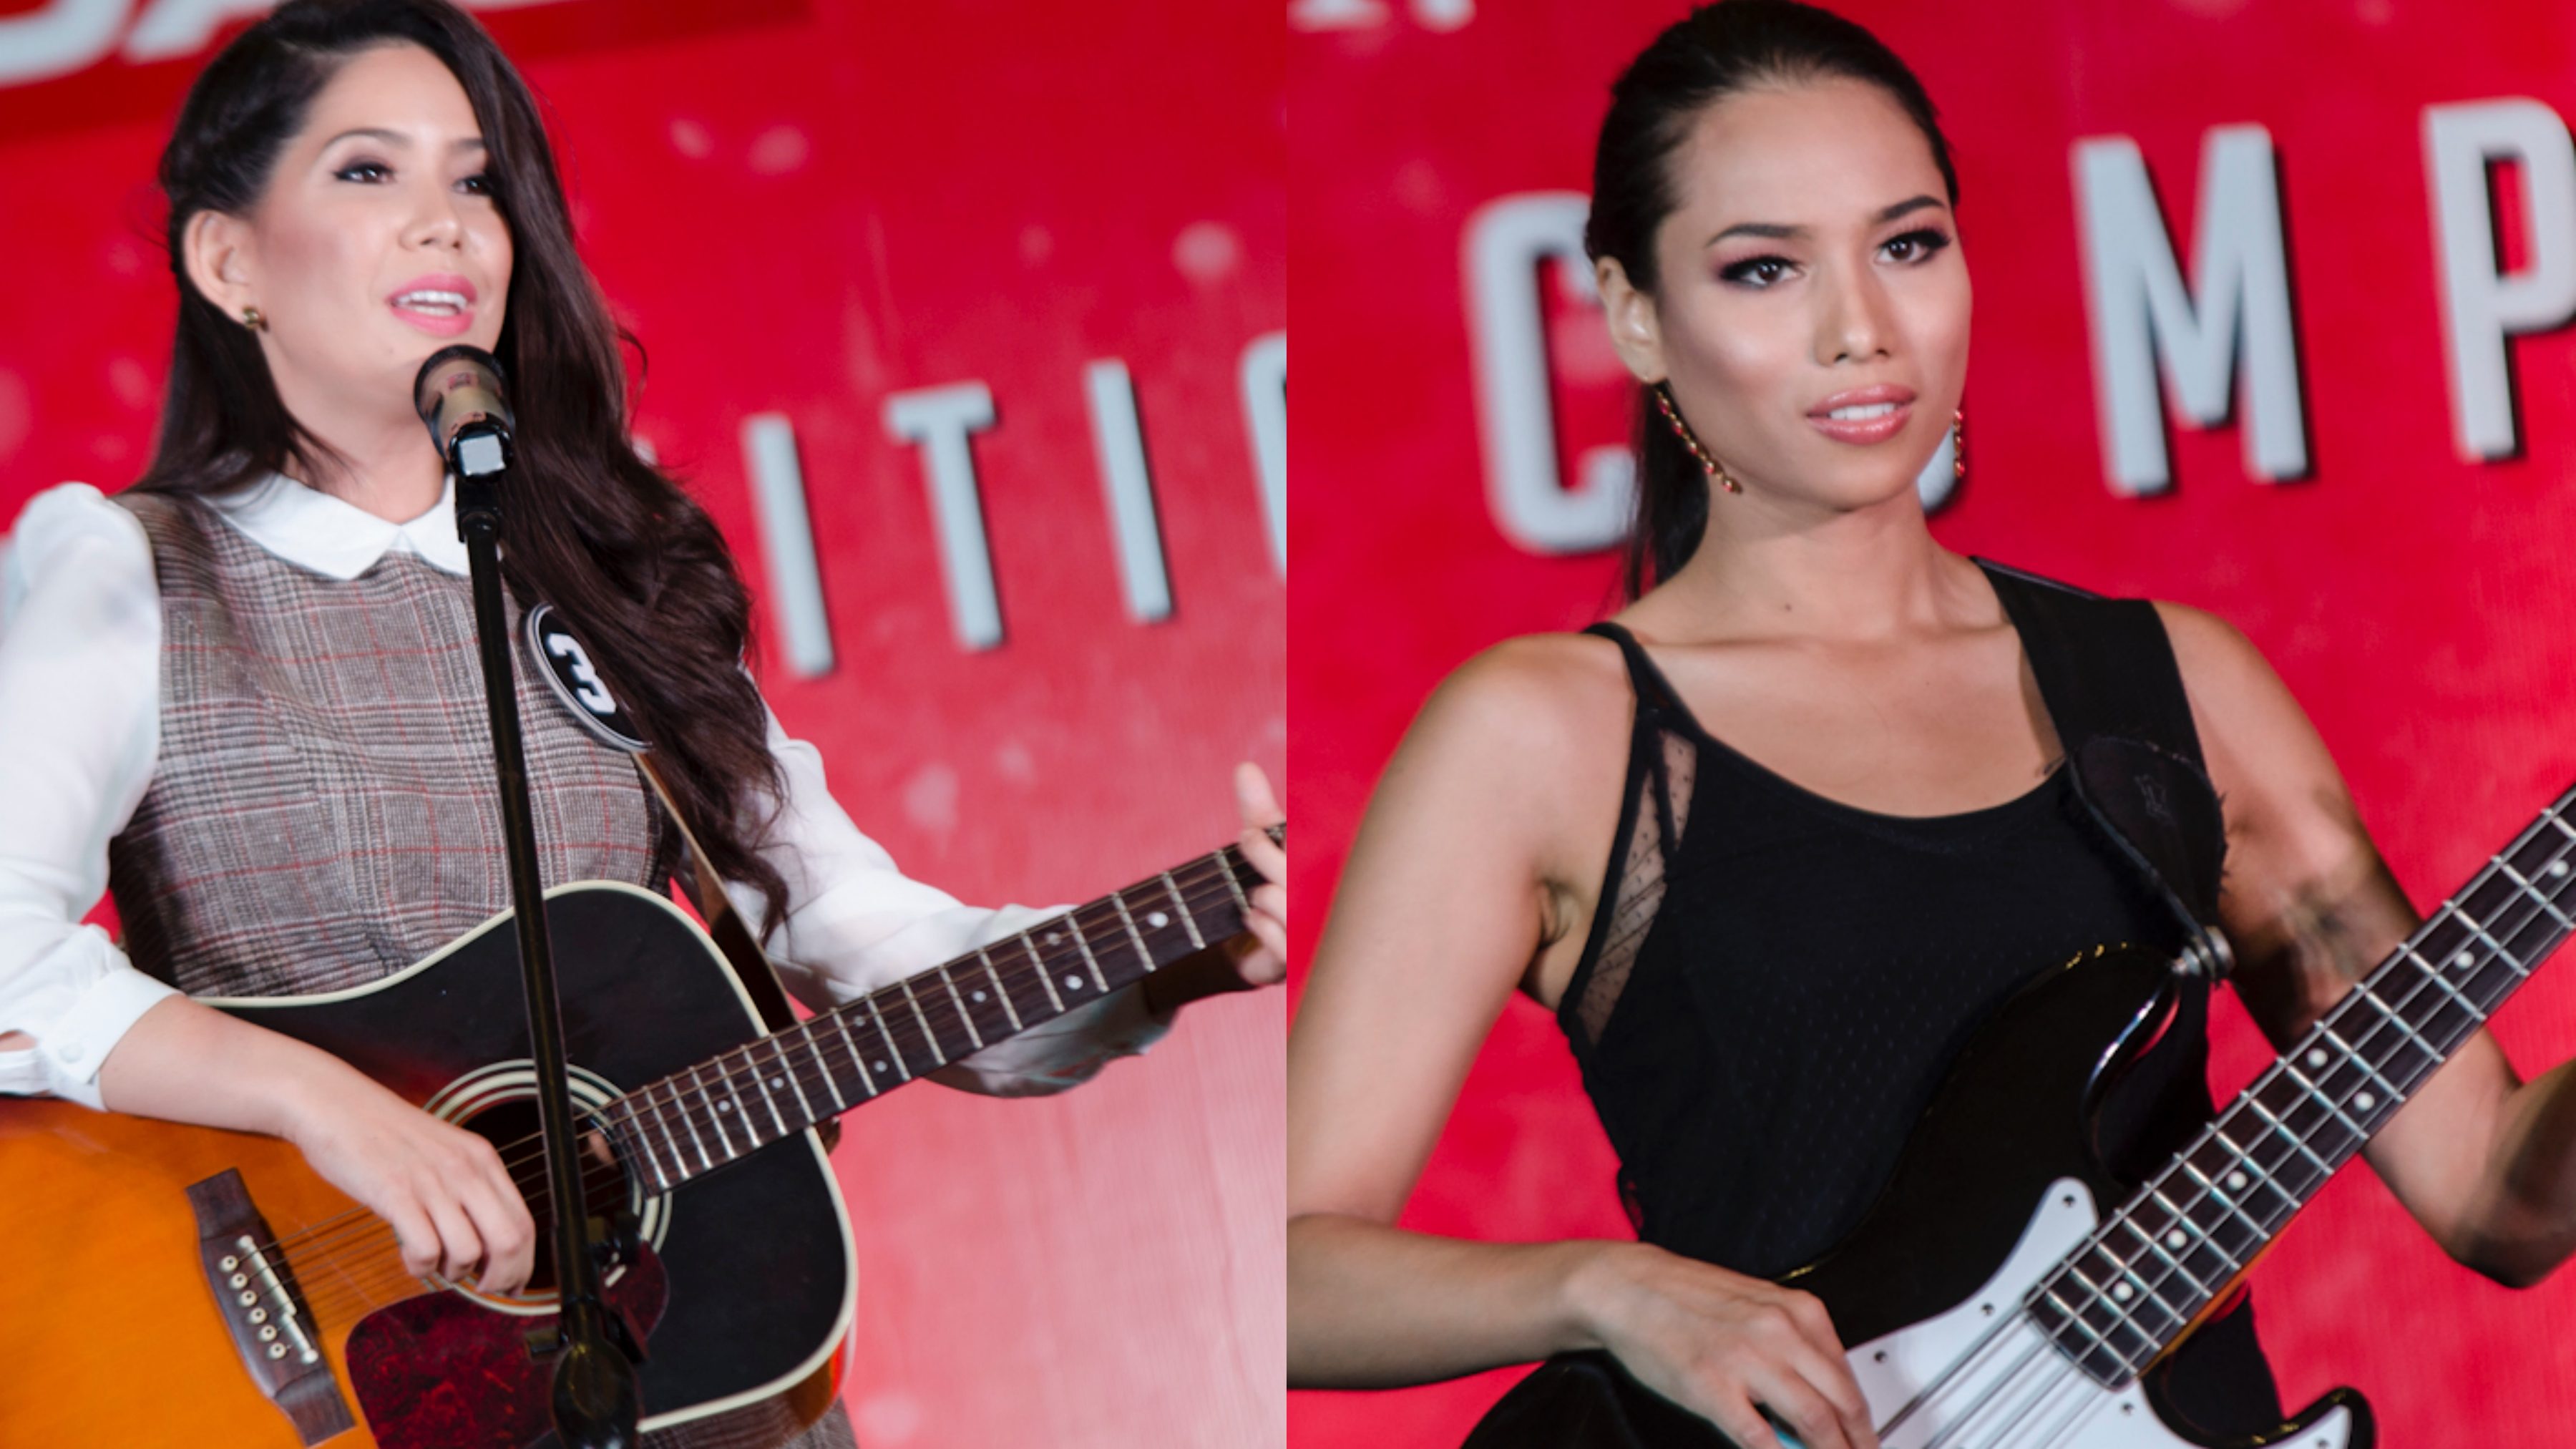 TALENT IN MUSIC. Thoreen Halvorsen and Elizabeth Clenci playing the guitar during their turn at the talent competition. Photo by Rob Reyes/Rappler  